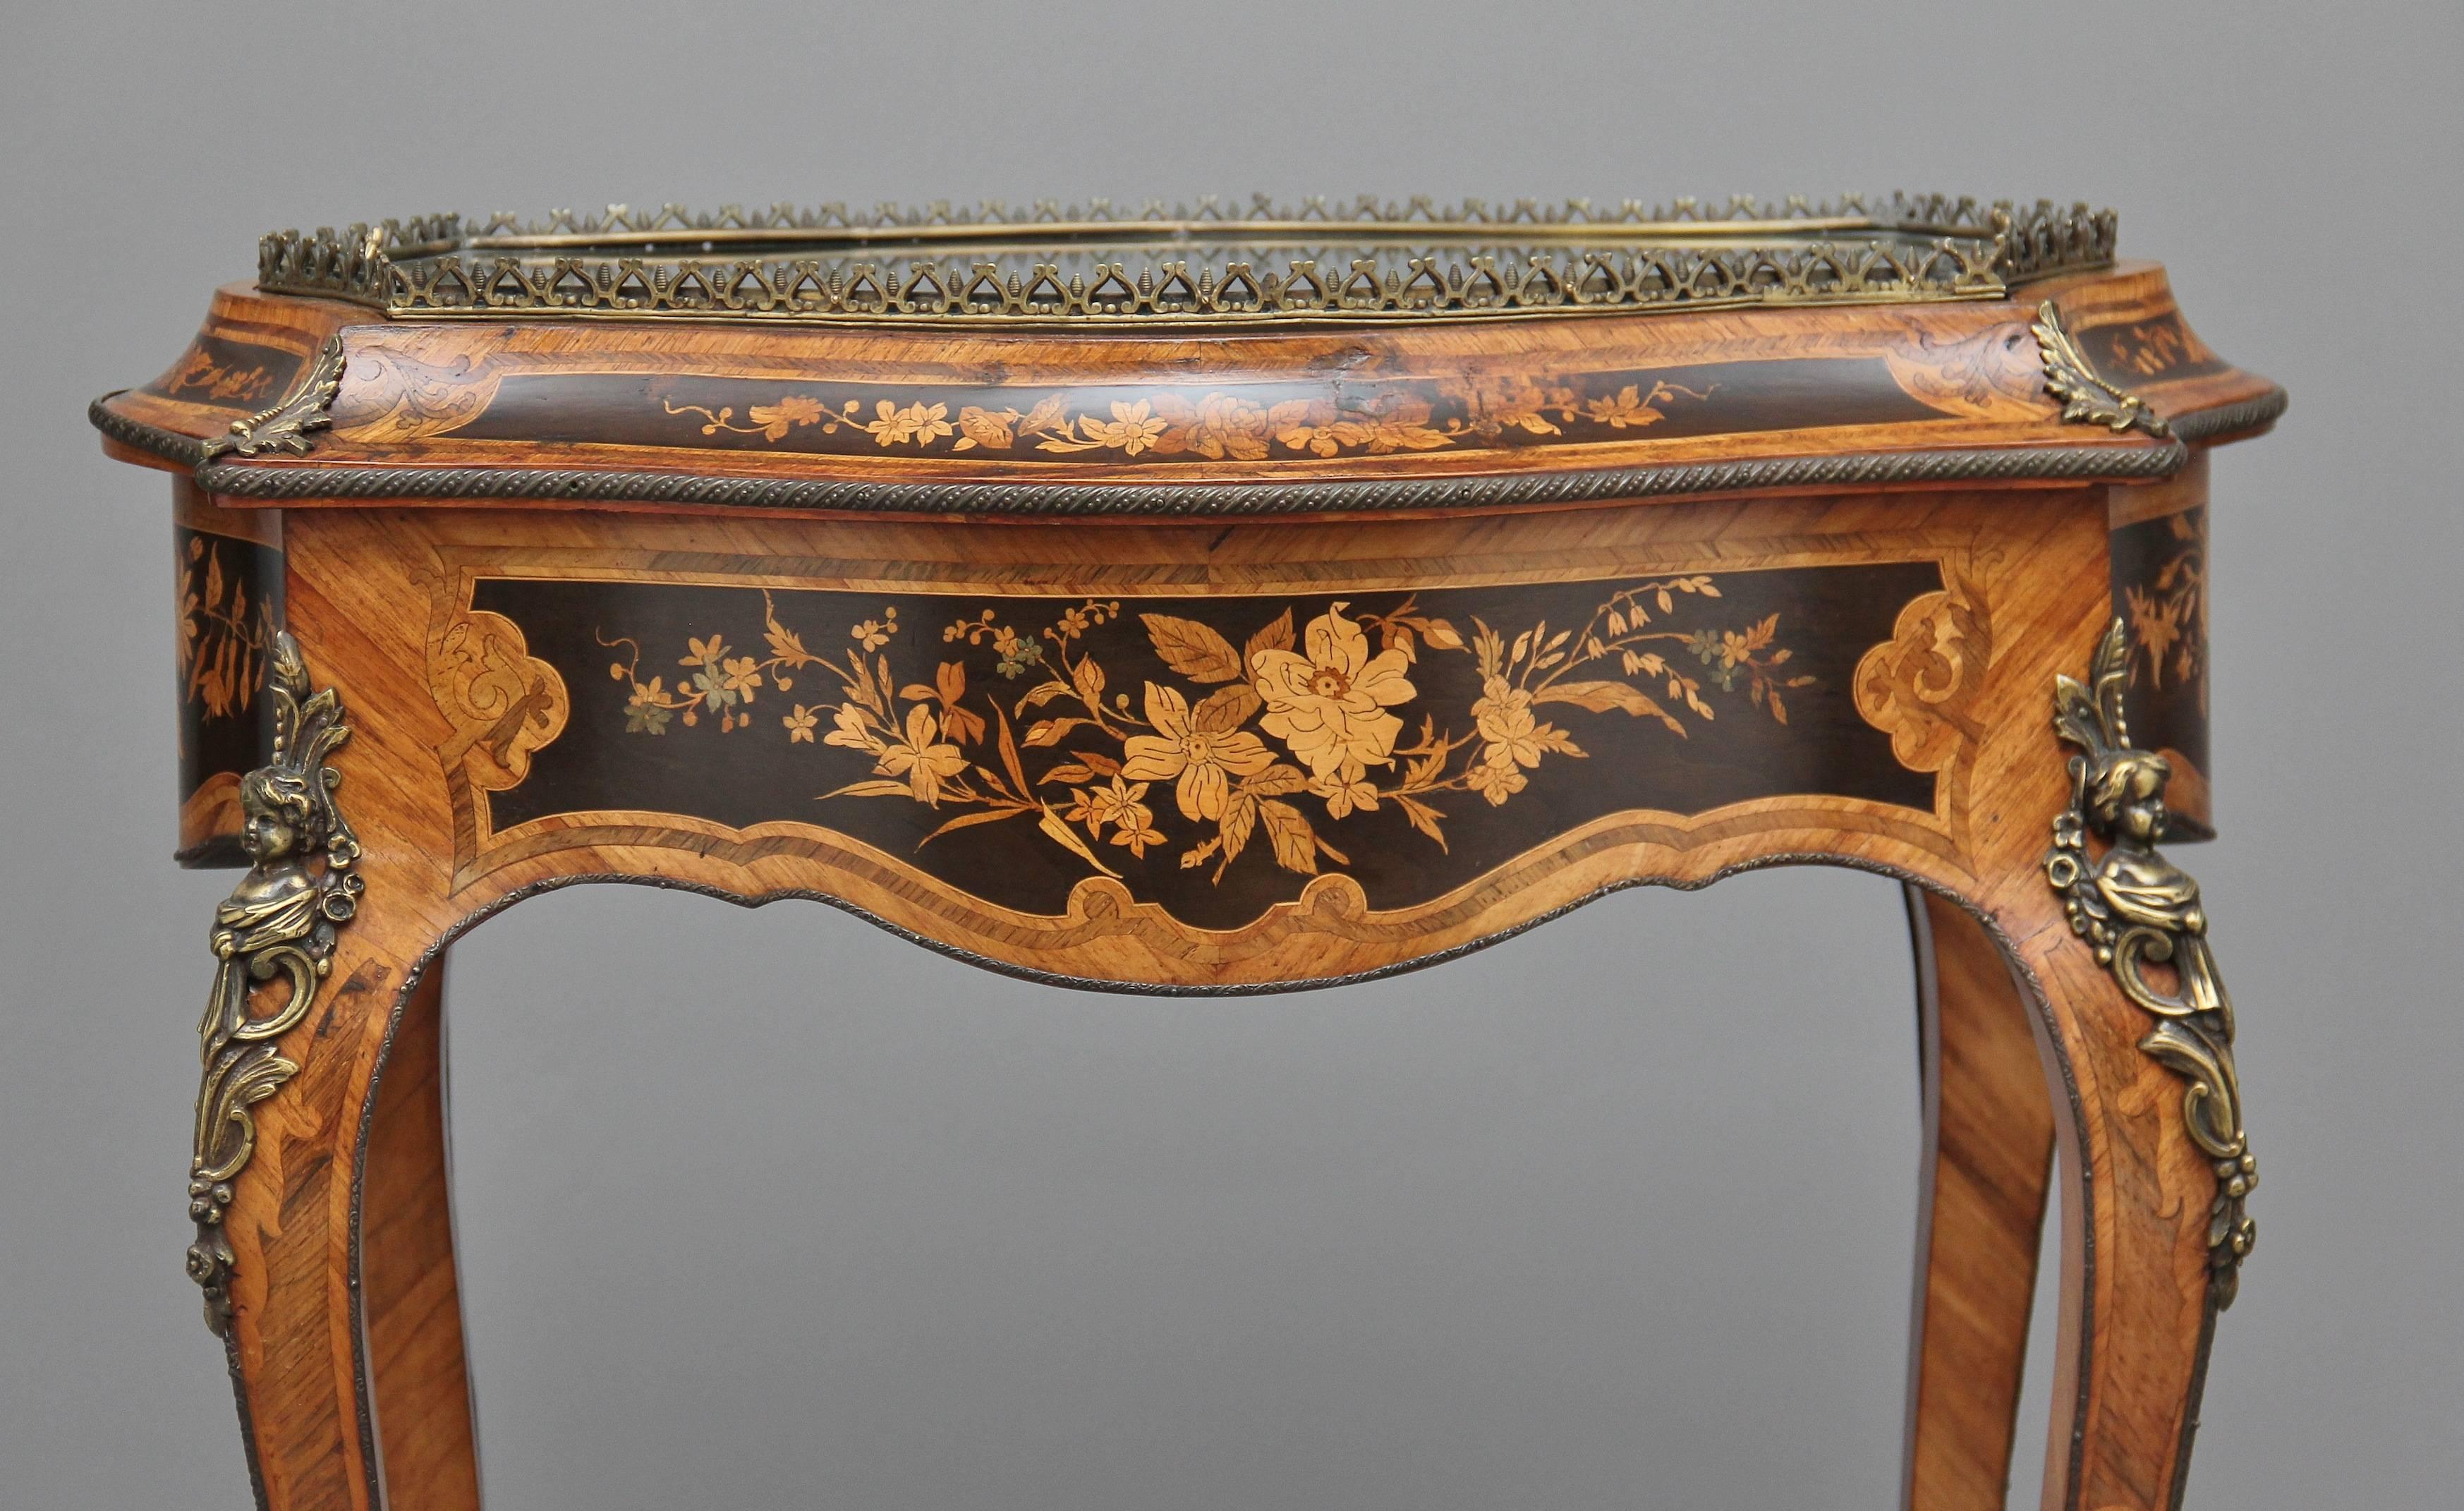 19th Century French Inlaid Kingwood Bijouterie Table 2